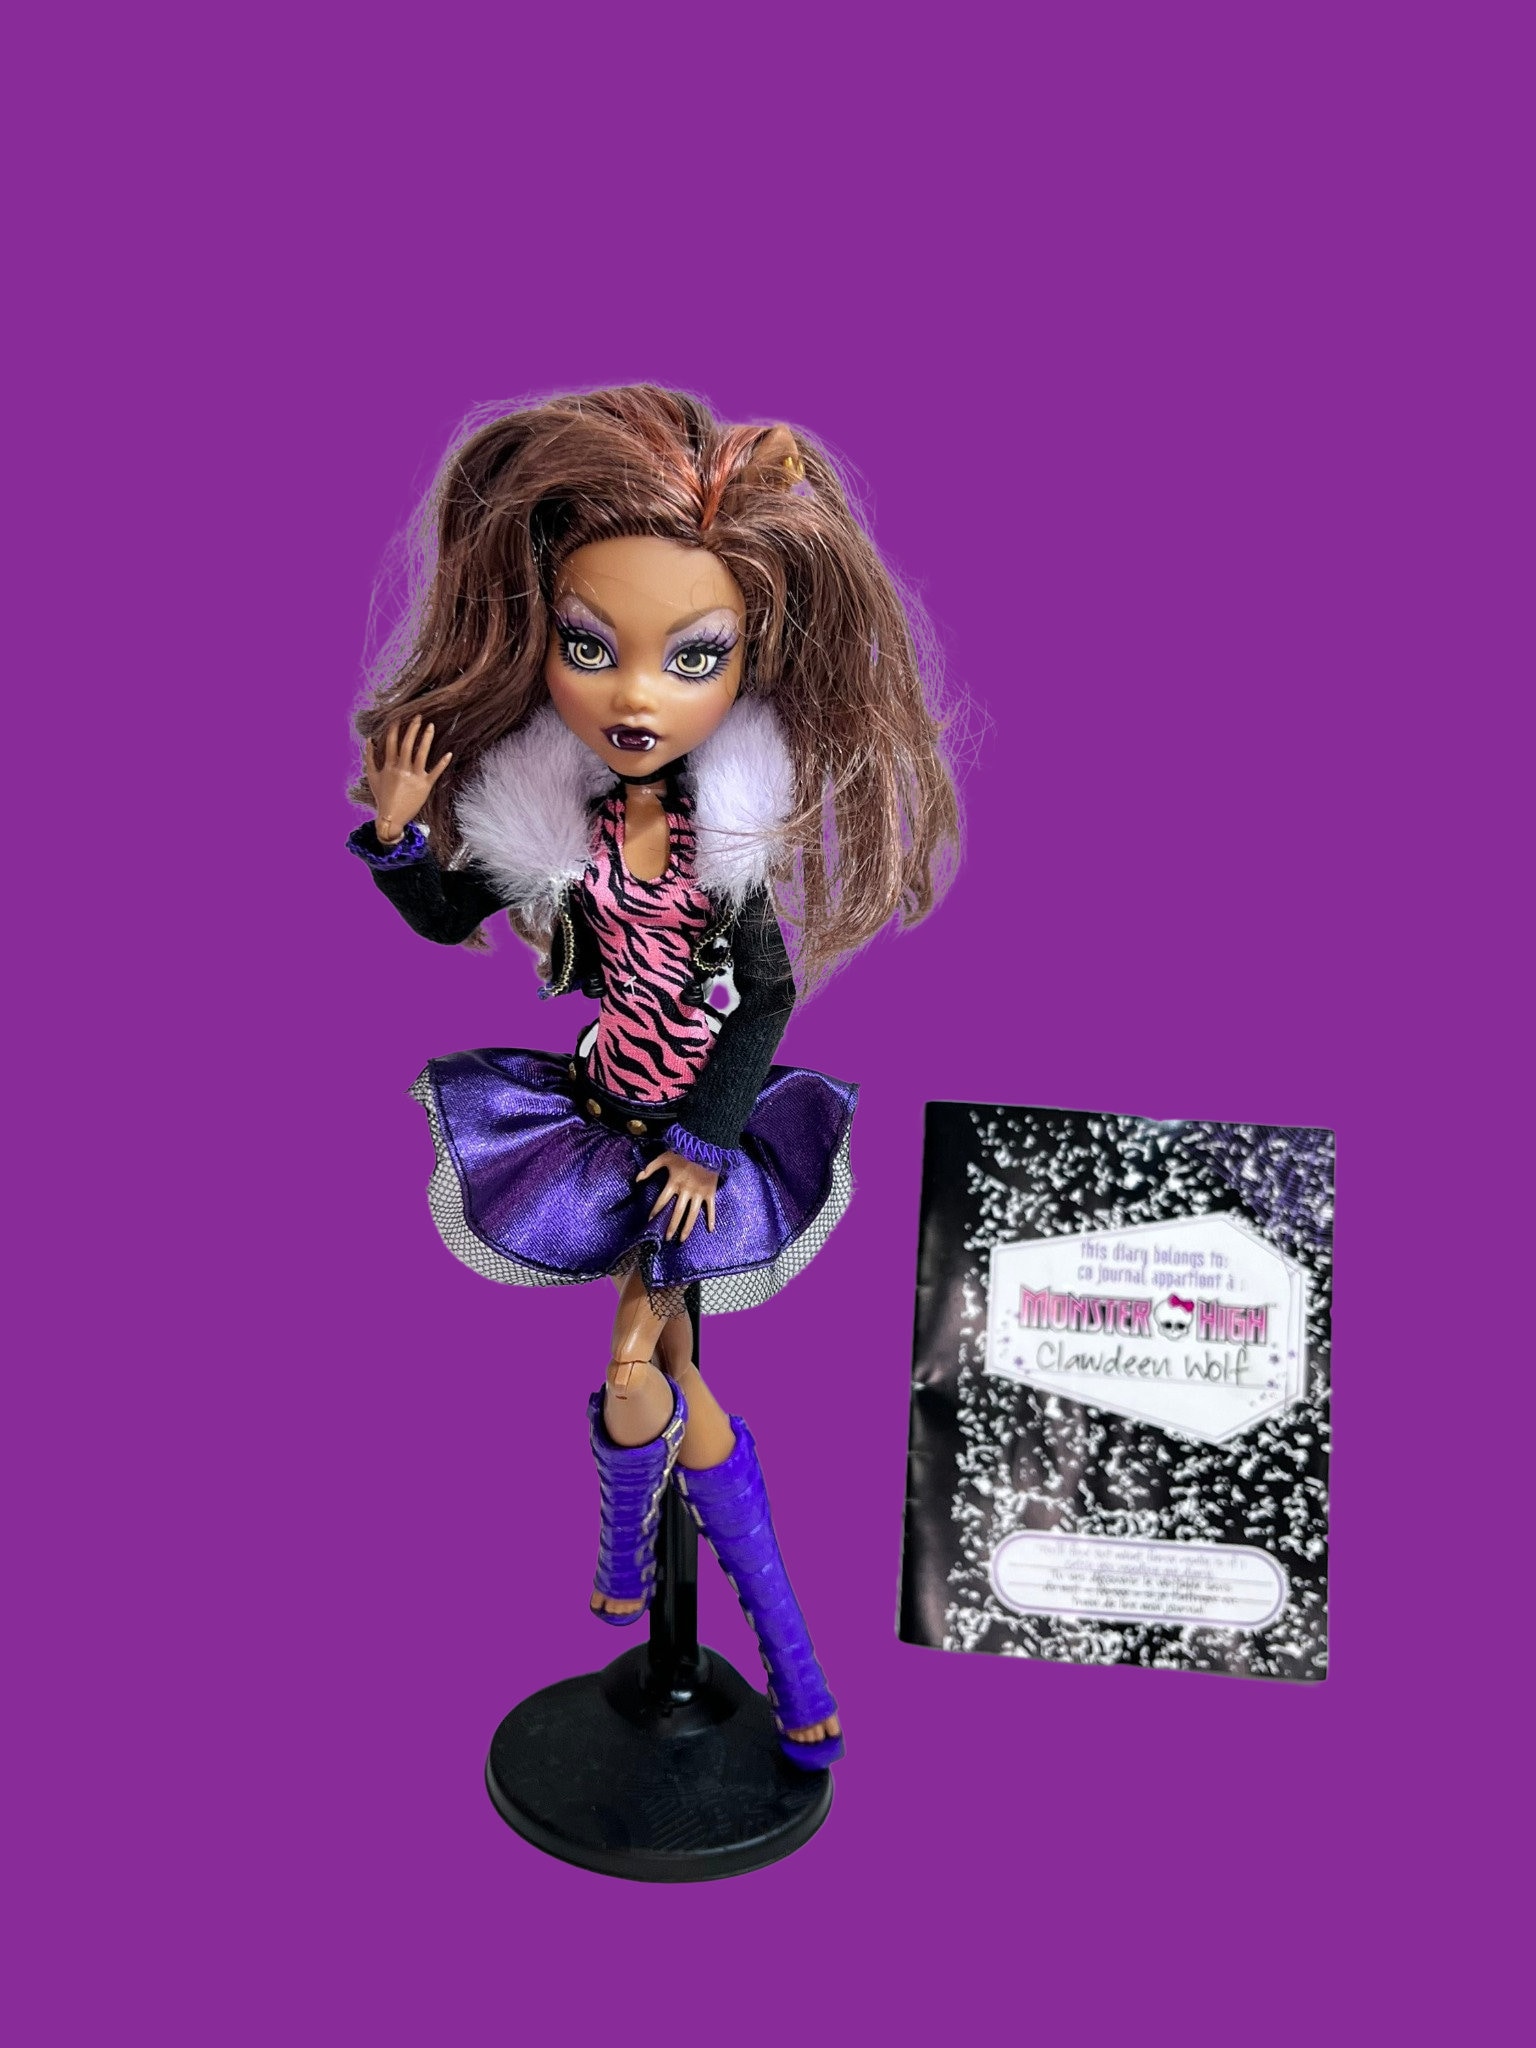 Lot of 2 Monster High Doll Cleo De Nile & Clawdeen Wolf with Pet